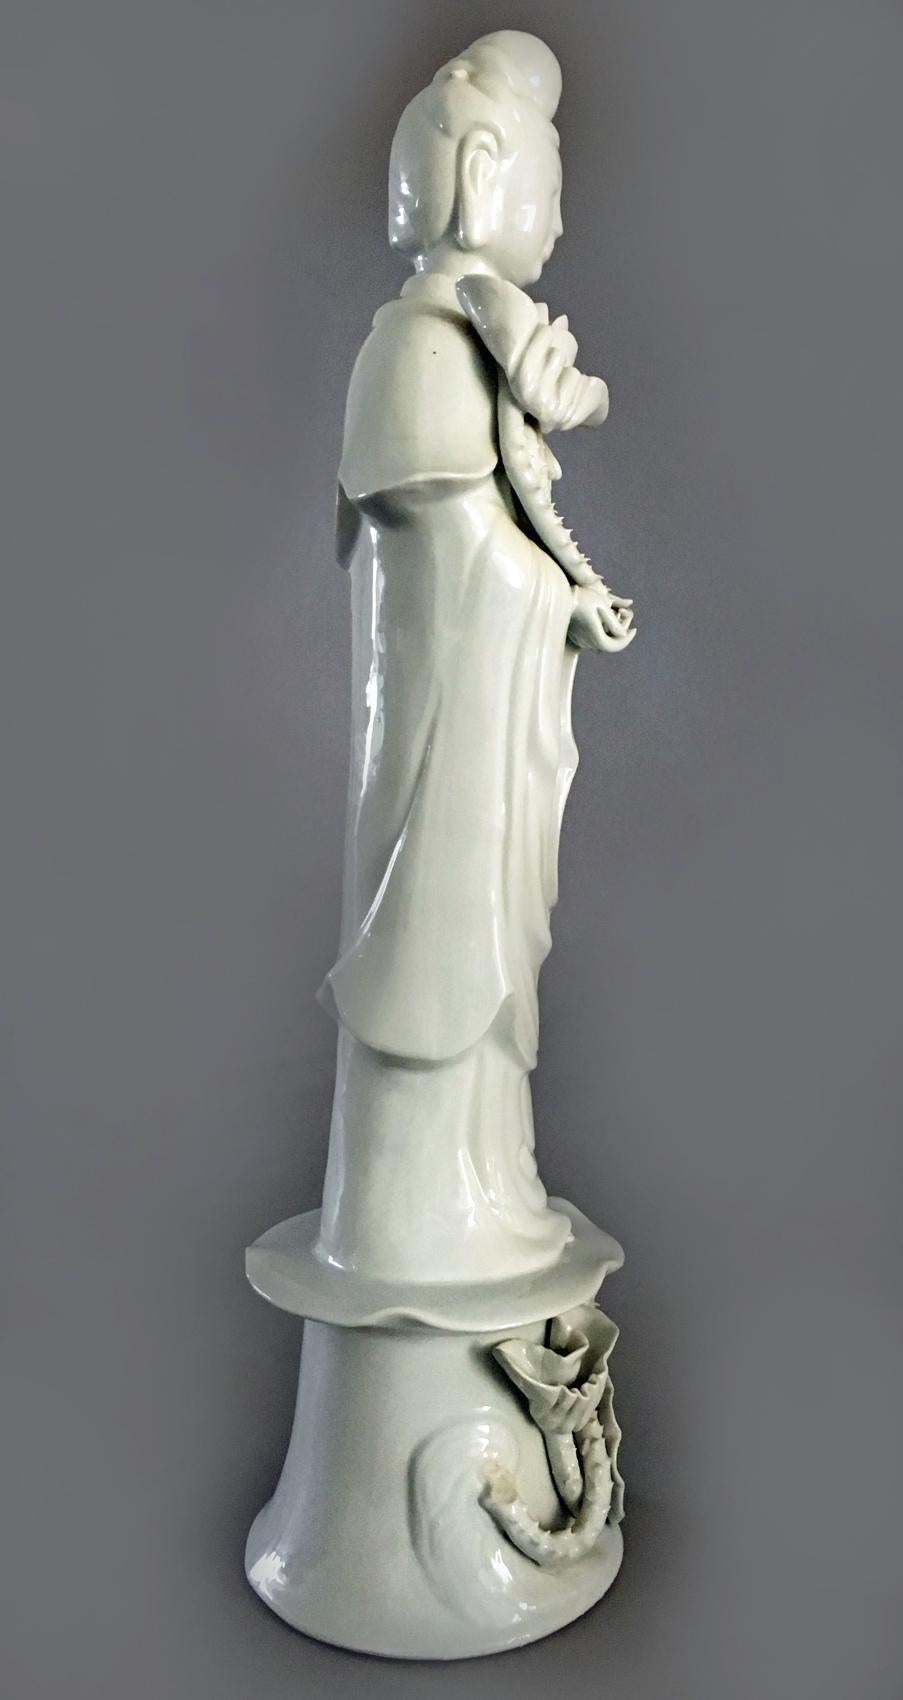 Chinese tall blanc de chine standing Quan Yin dressed in a flowing robe holding a lotus blossom which suggests purity. The base is decorated with lotus flowers and pads.